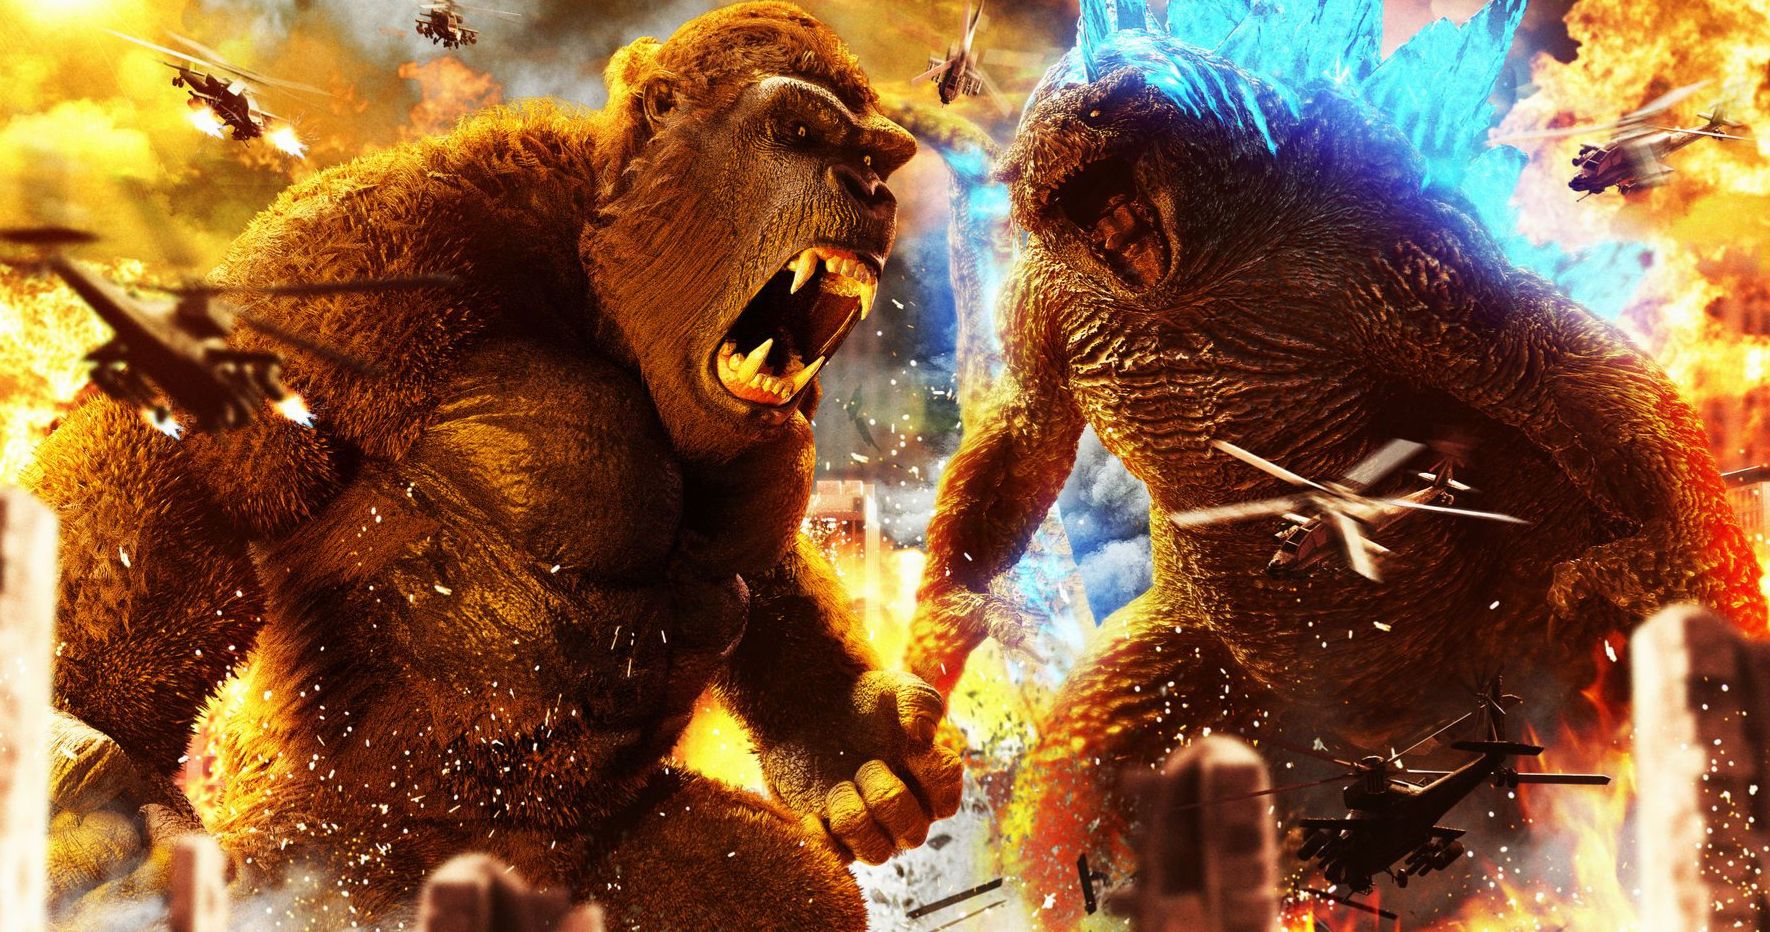 Godzilla Vs. Kong in Danger of Being Delayed